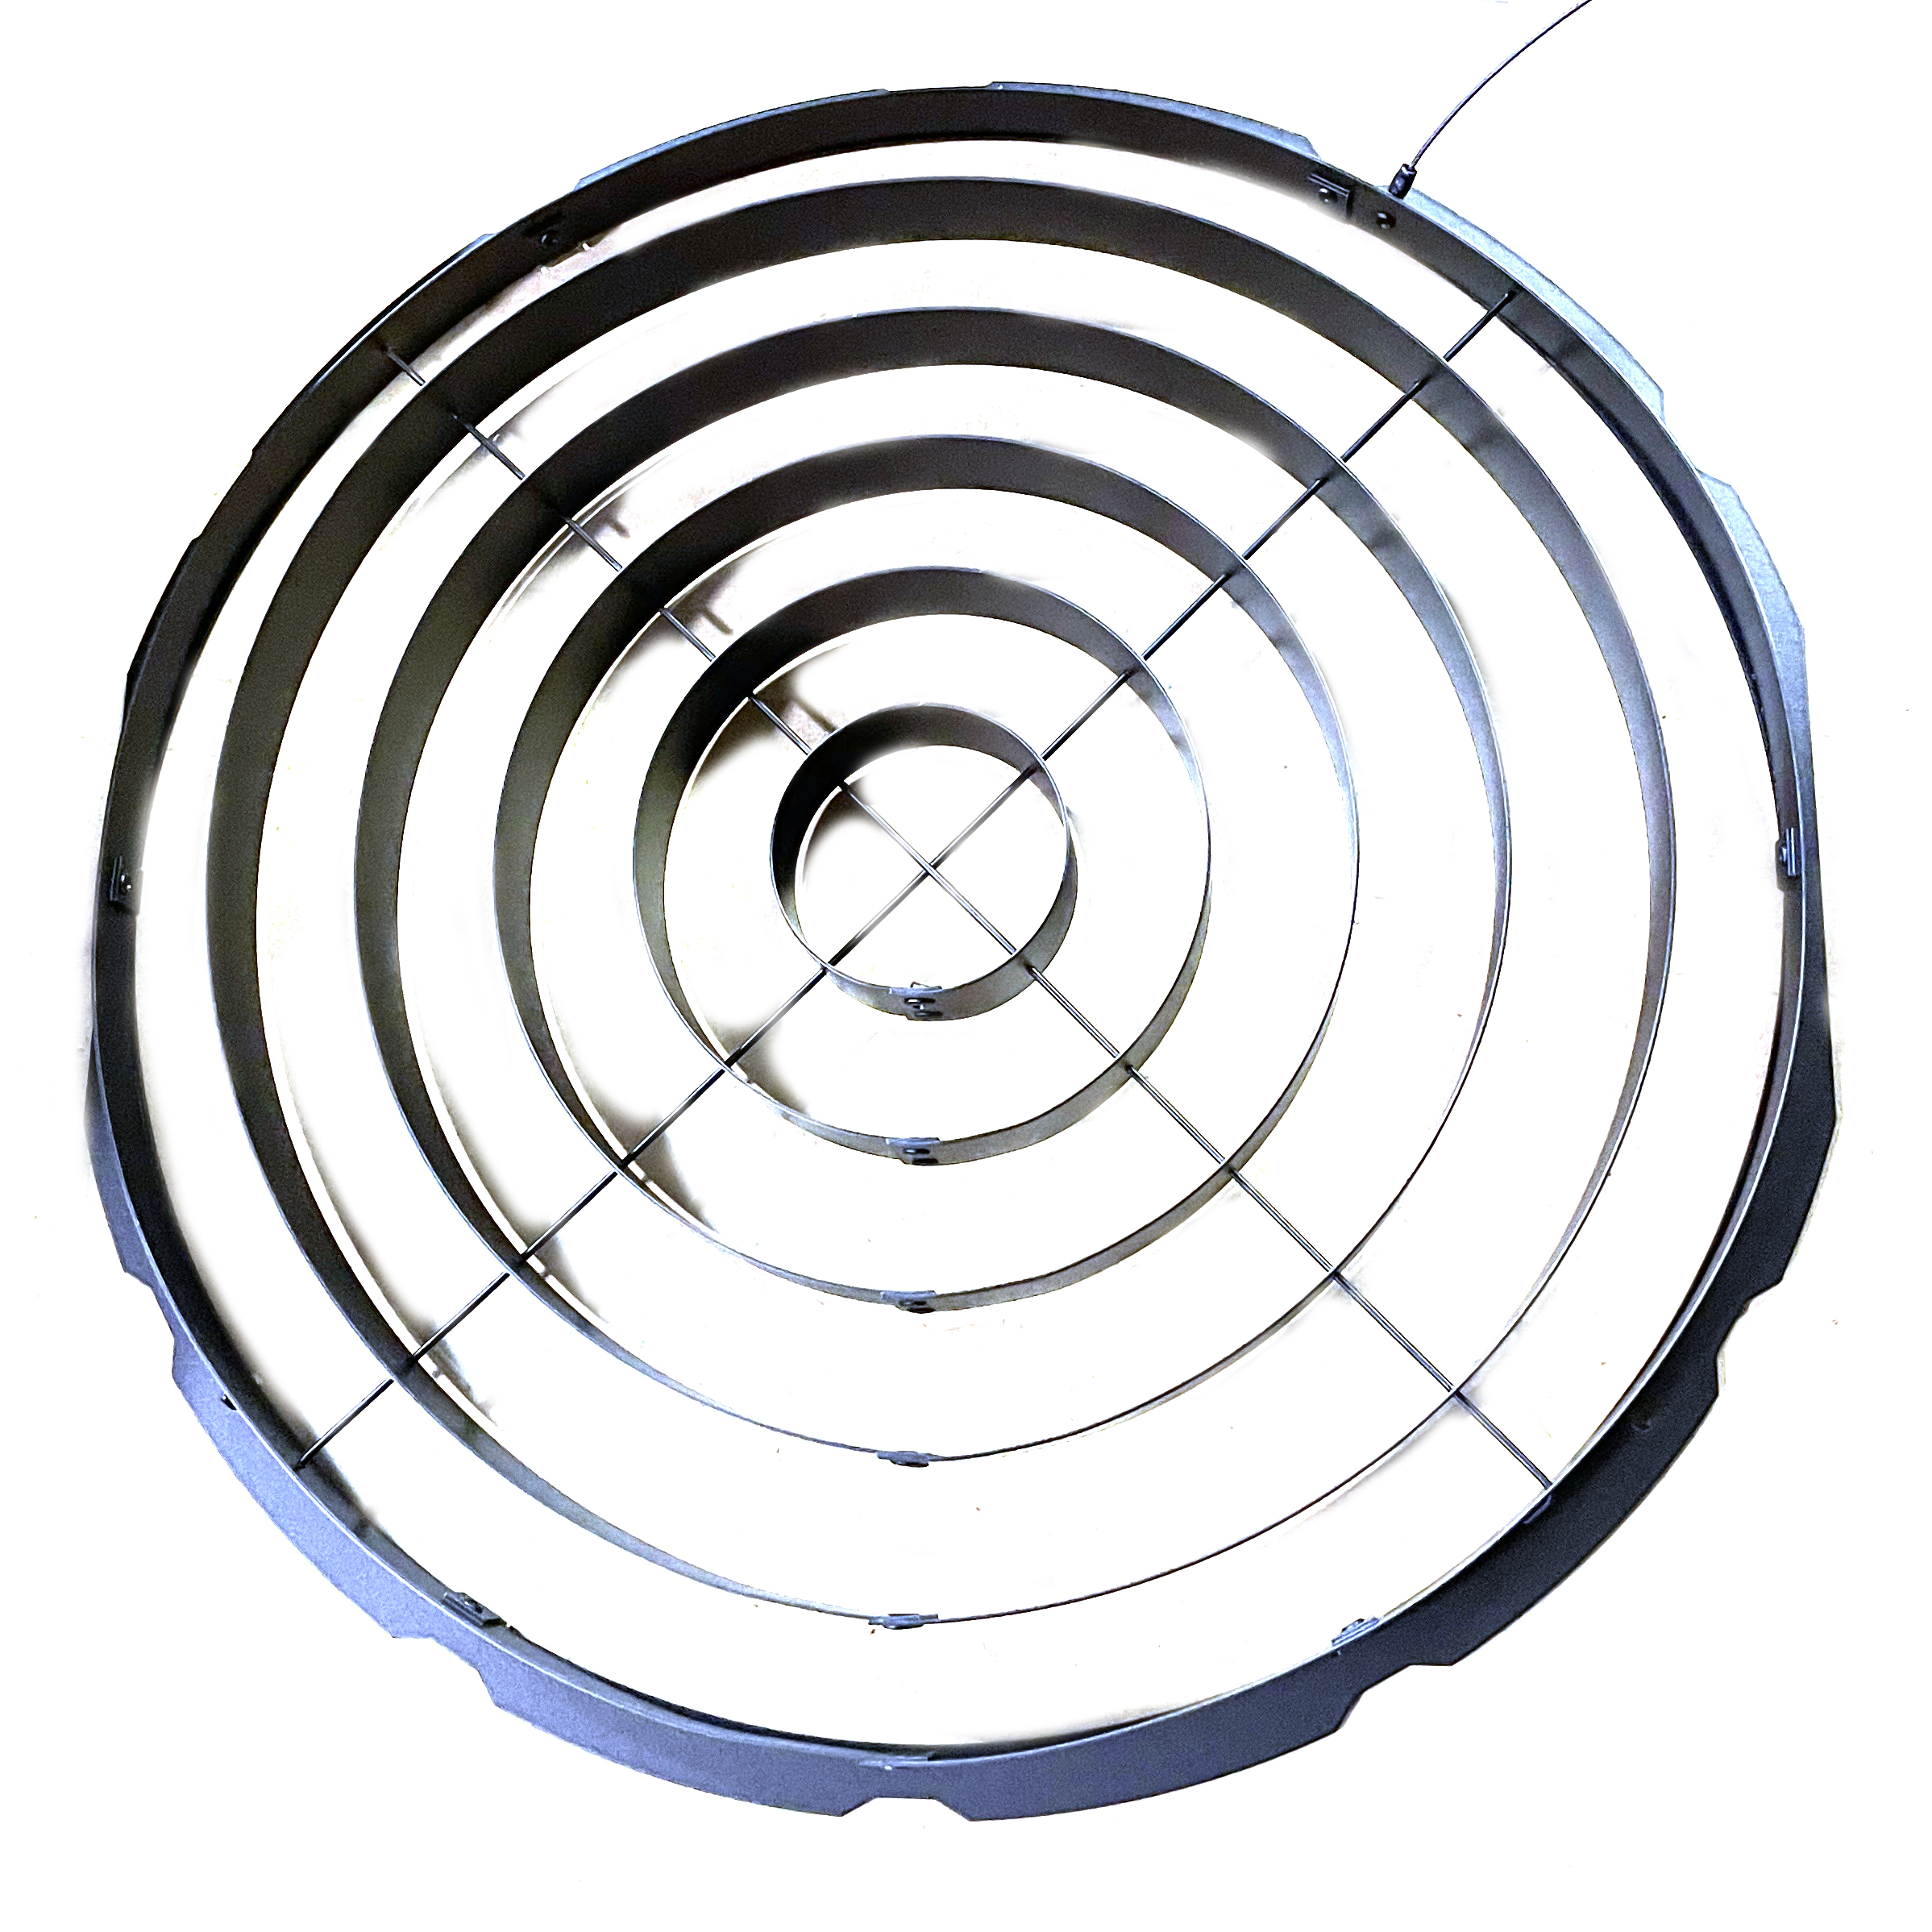 6377 Concentric Rings for GLP X4XL